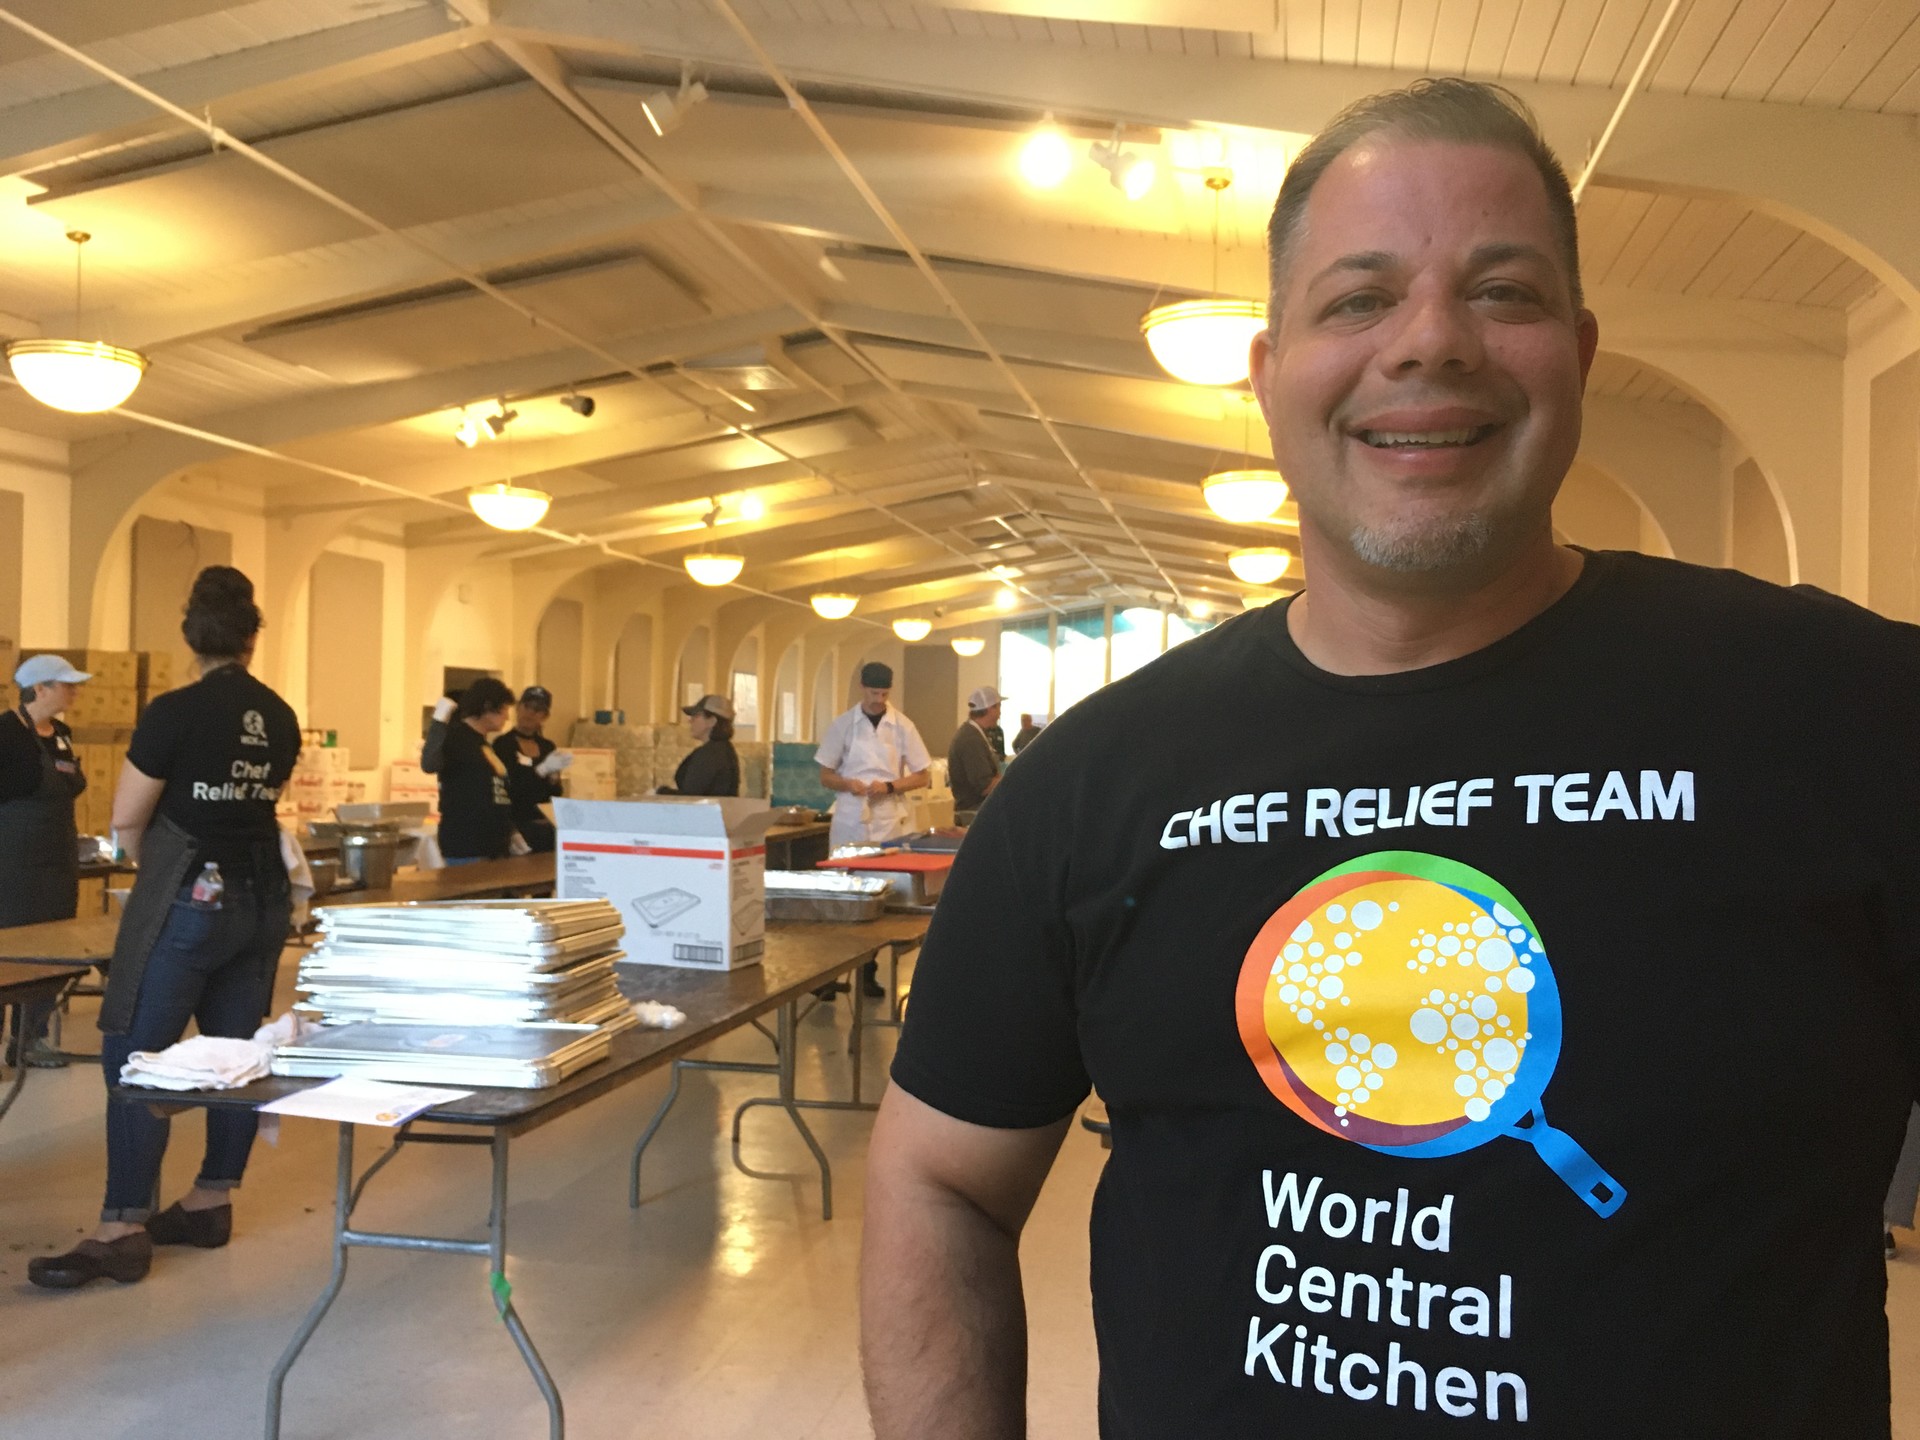 Chef Jason Collis of Ventura County, who works for World Central Kitchen full-time, was one of four “relief leads” who organized a volunteer army of roughly 50 people to prepare meals during the Kincade Fire at the Sonoma County Fairgrounds.